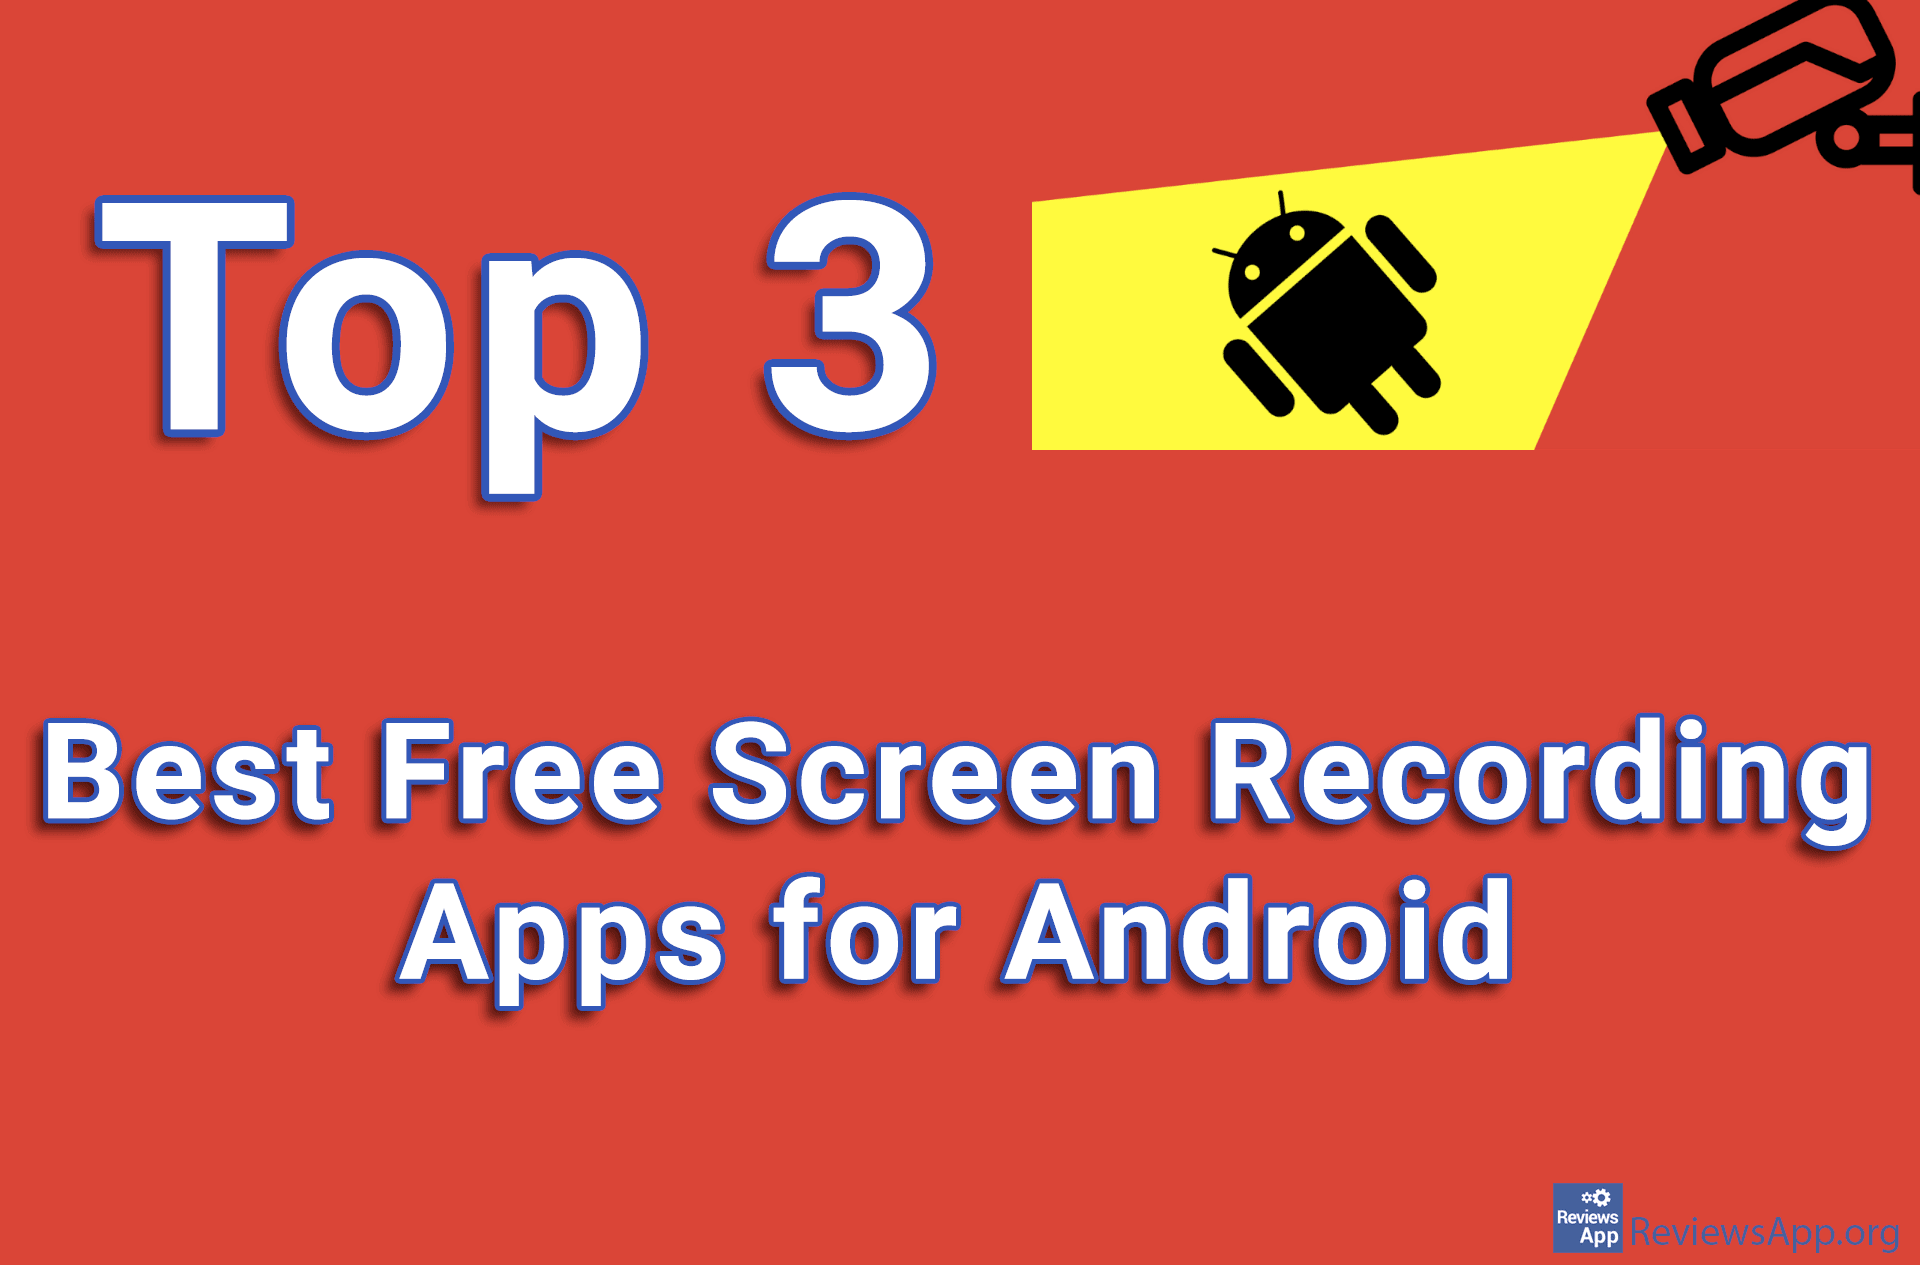 Top 3 best free screen recording apps for Android